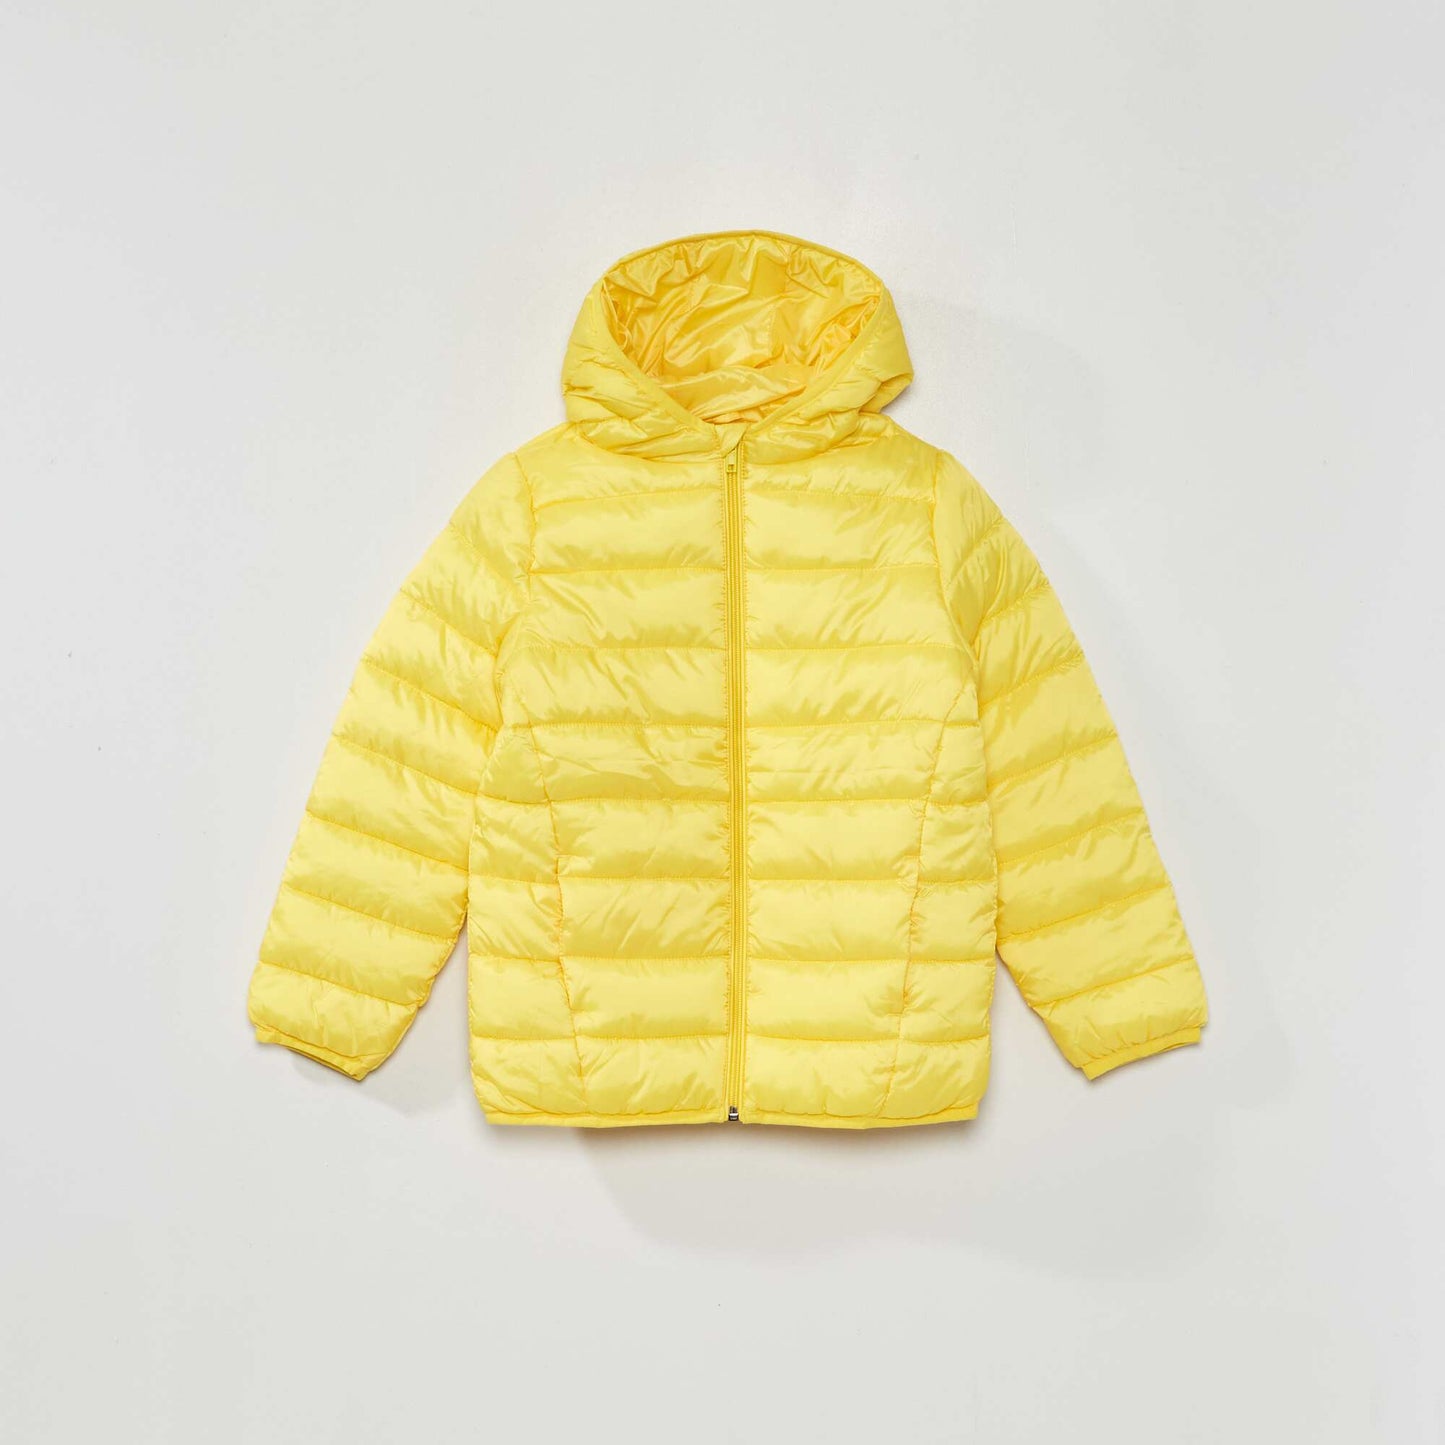 Padded jacket made from recycled bottles YELLOWZEST